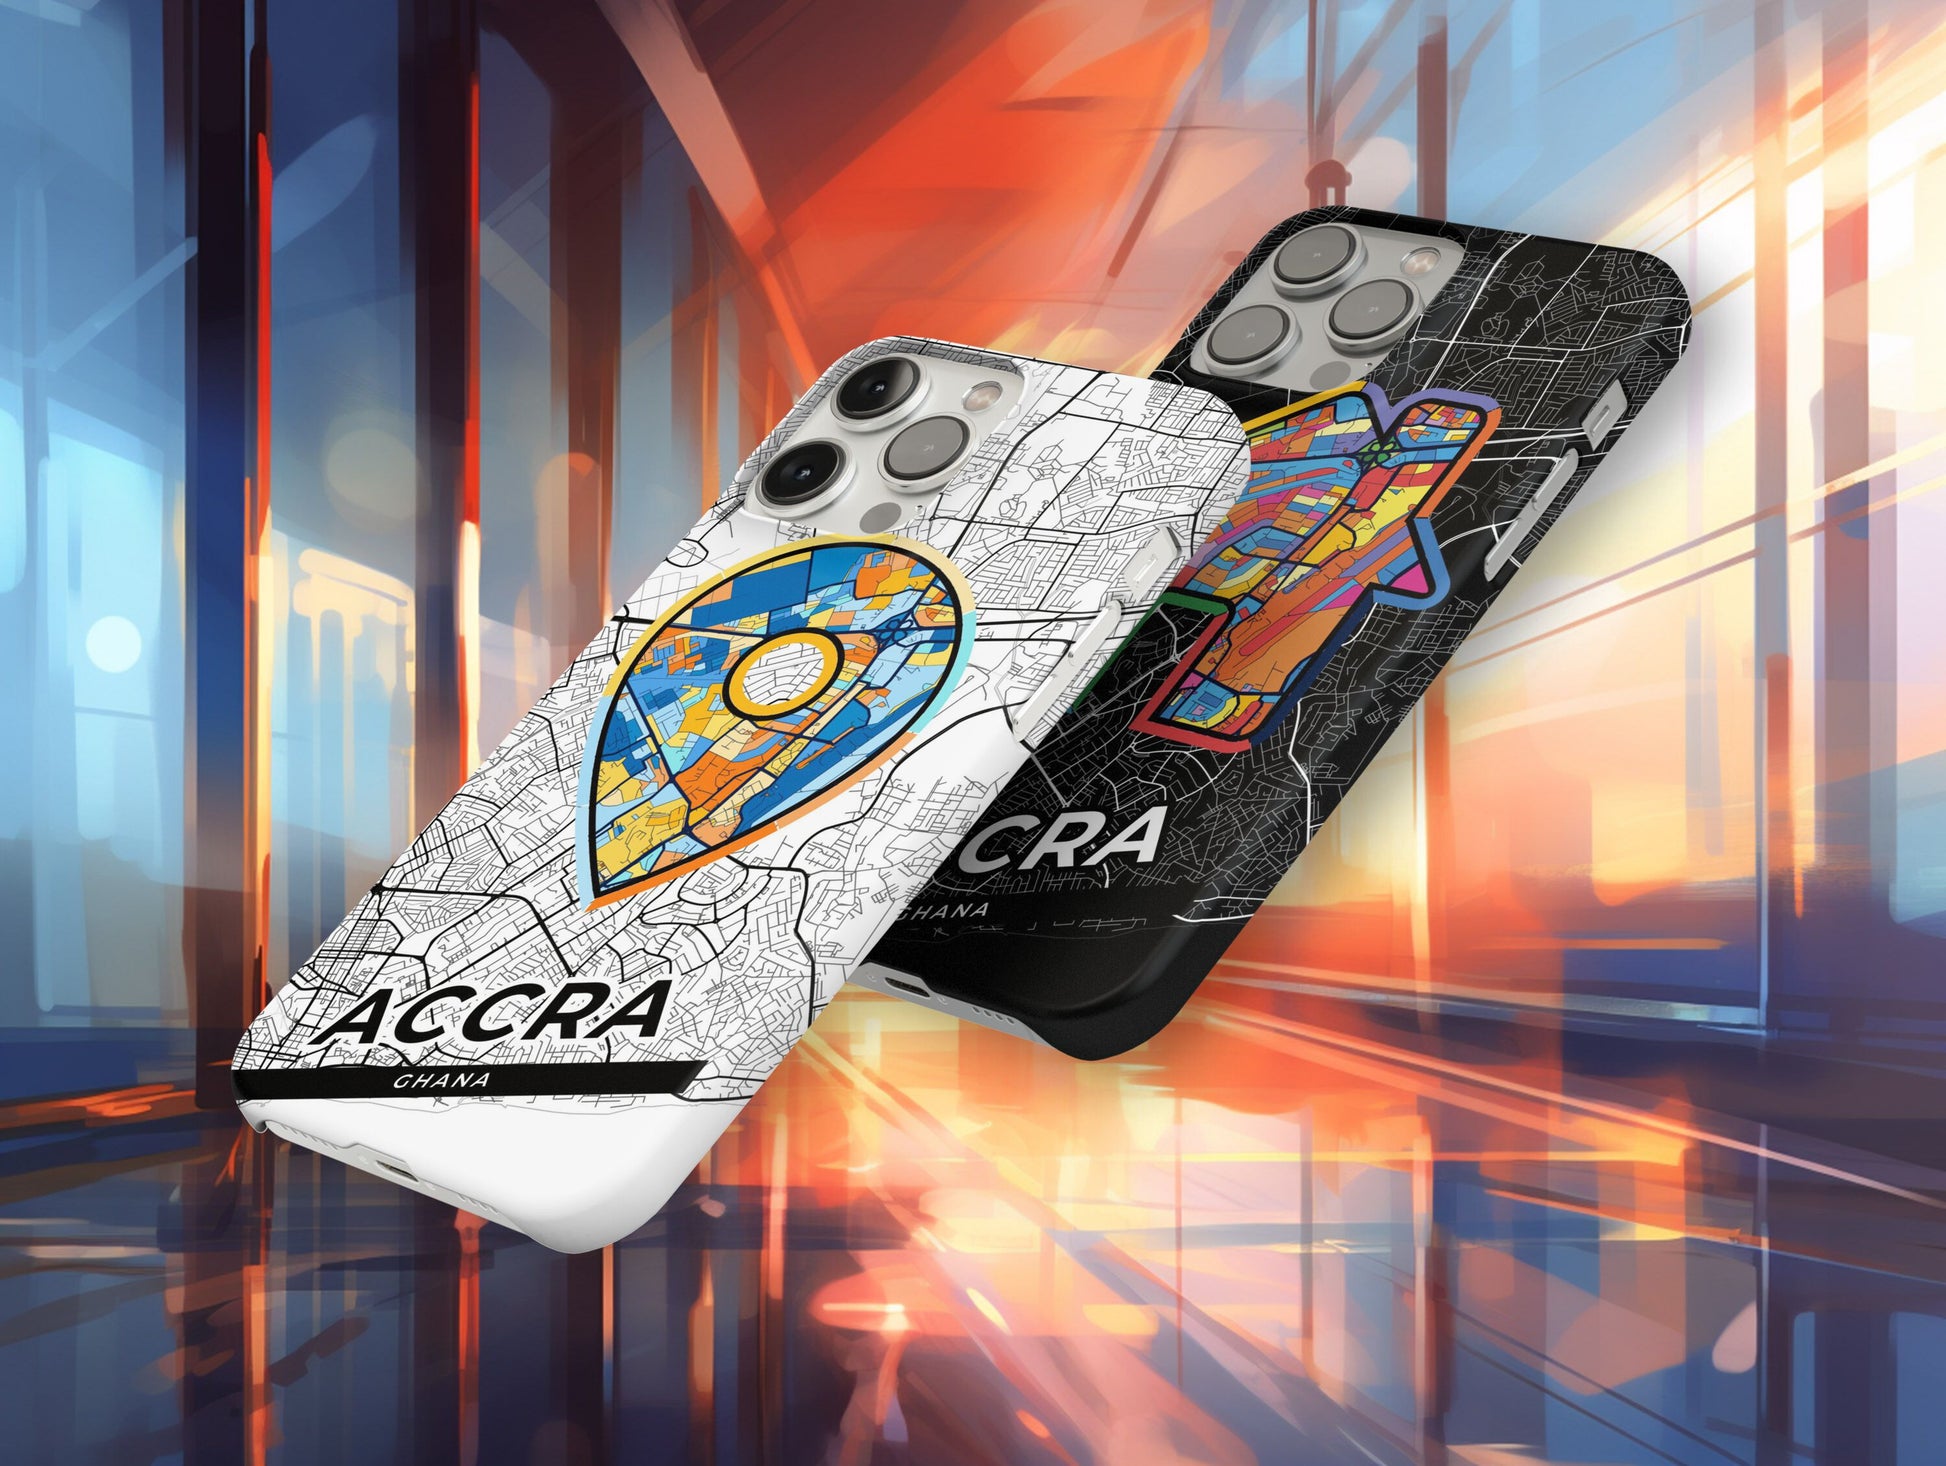 Accra Ghana slim phone case with colorful icon. Birthday, wedding or housewarming gift. Couple match cases.